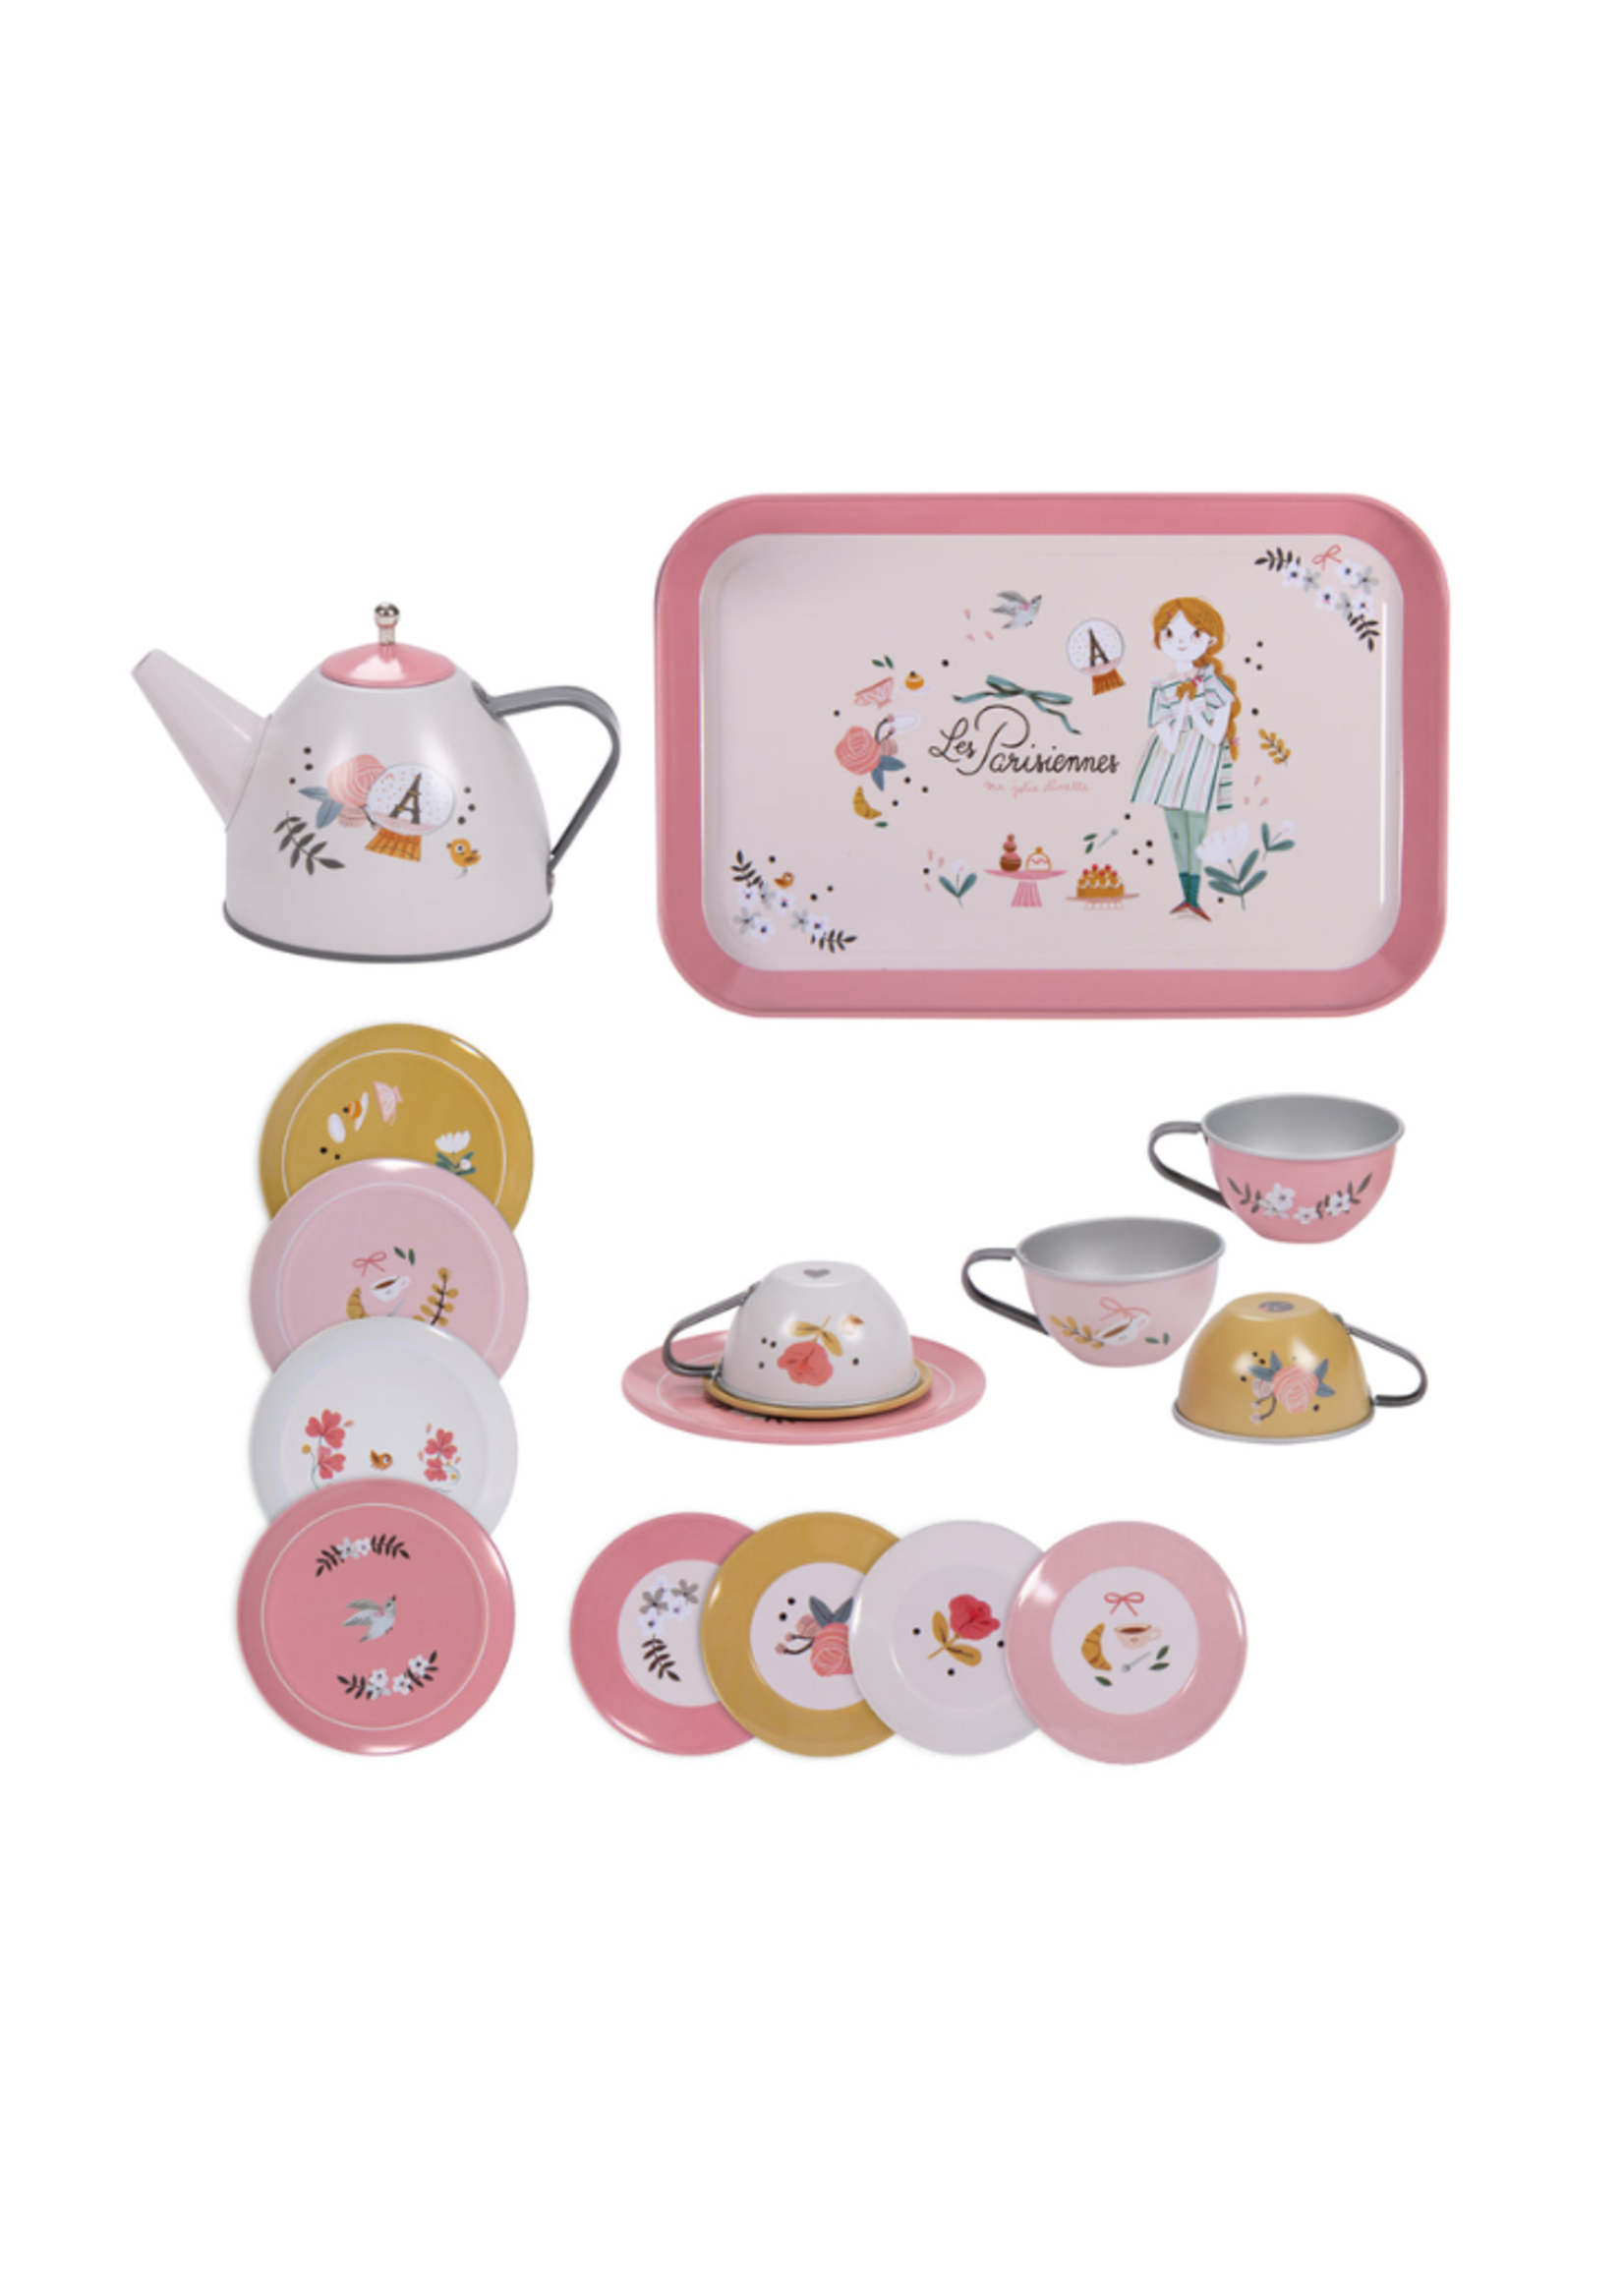 Moulin Roty Tea Party Set in Suitcase